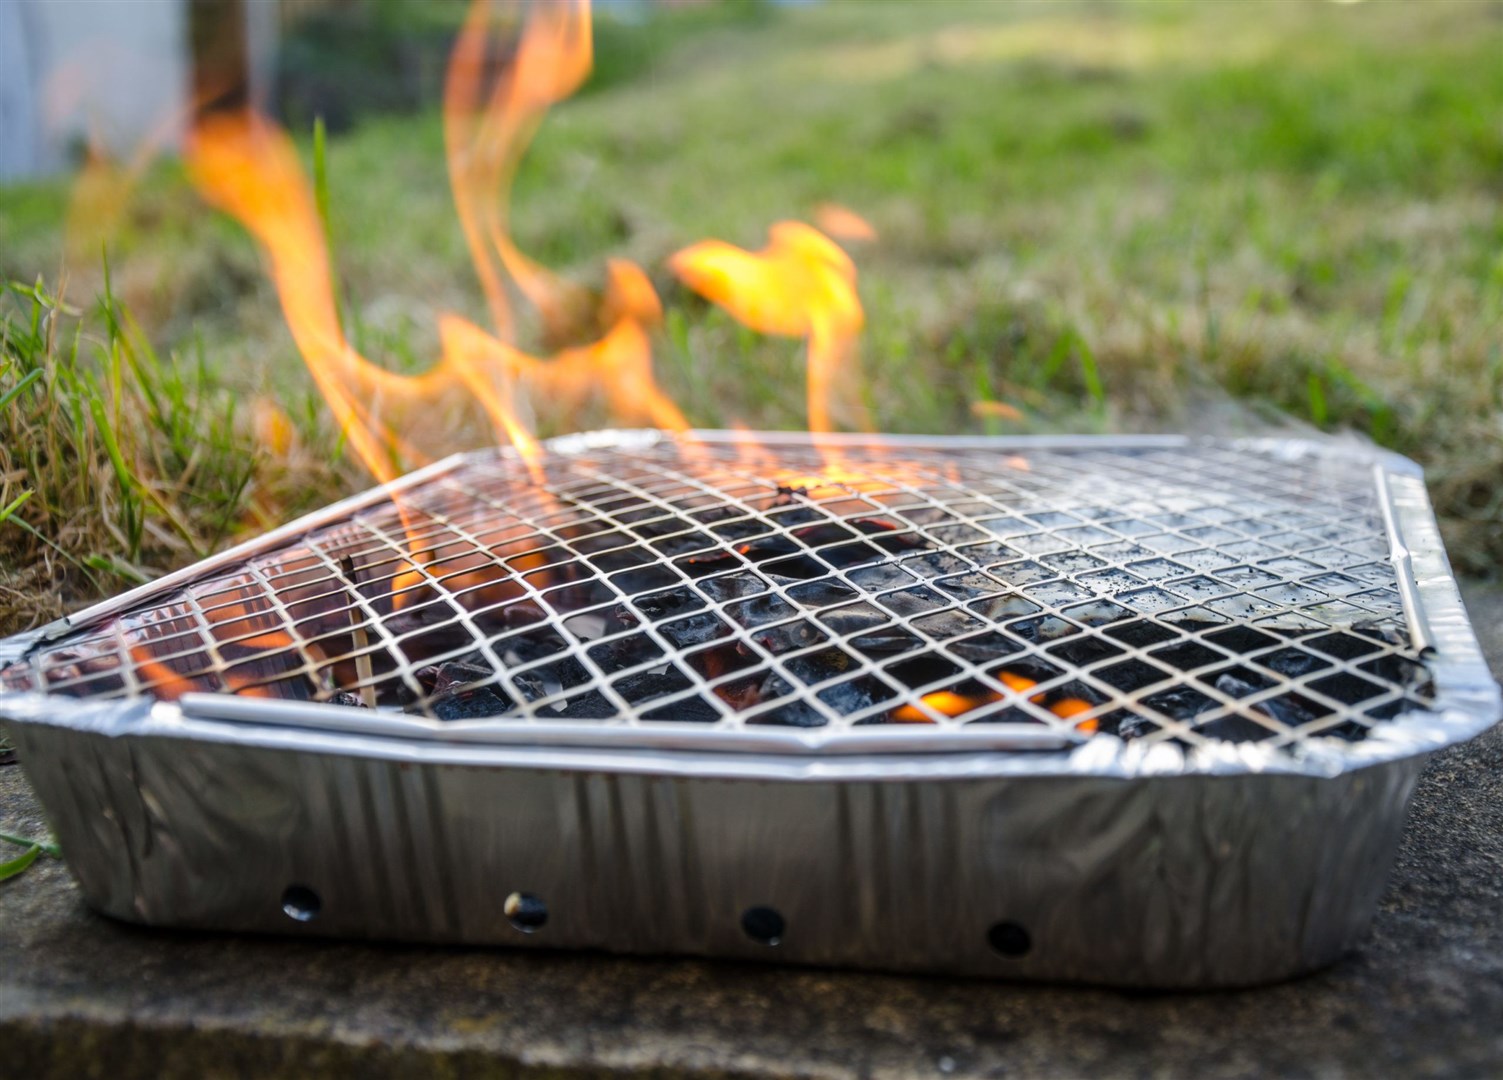 Disposal barbecues could potentially be banned from being used in the Cairngorms National Park.